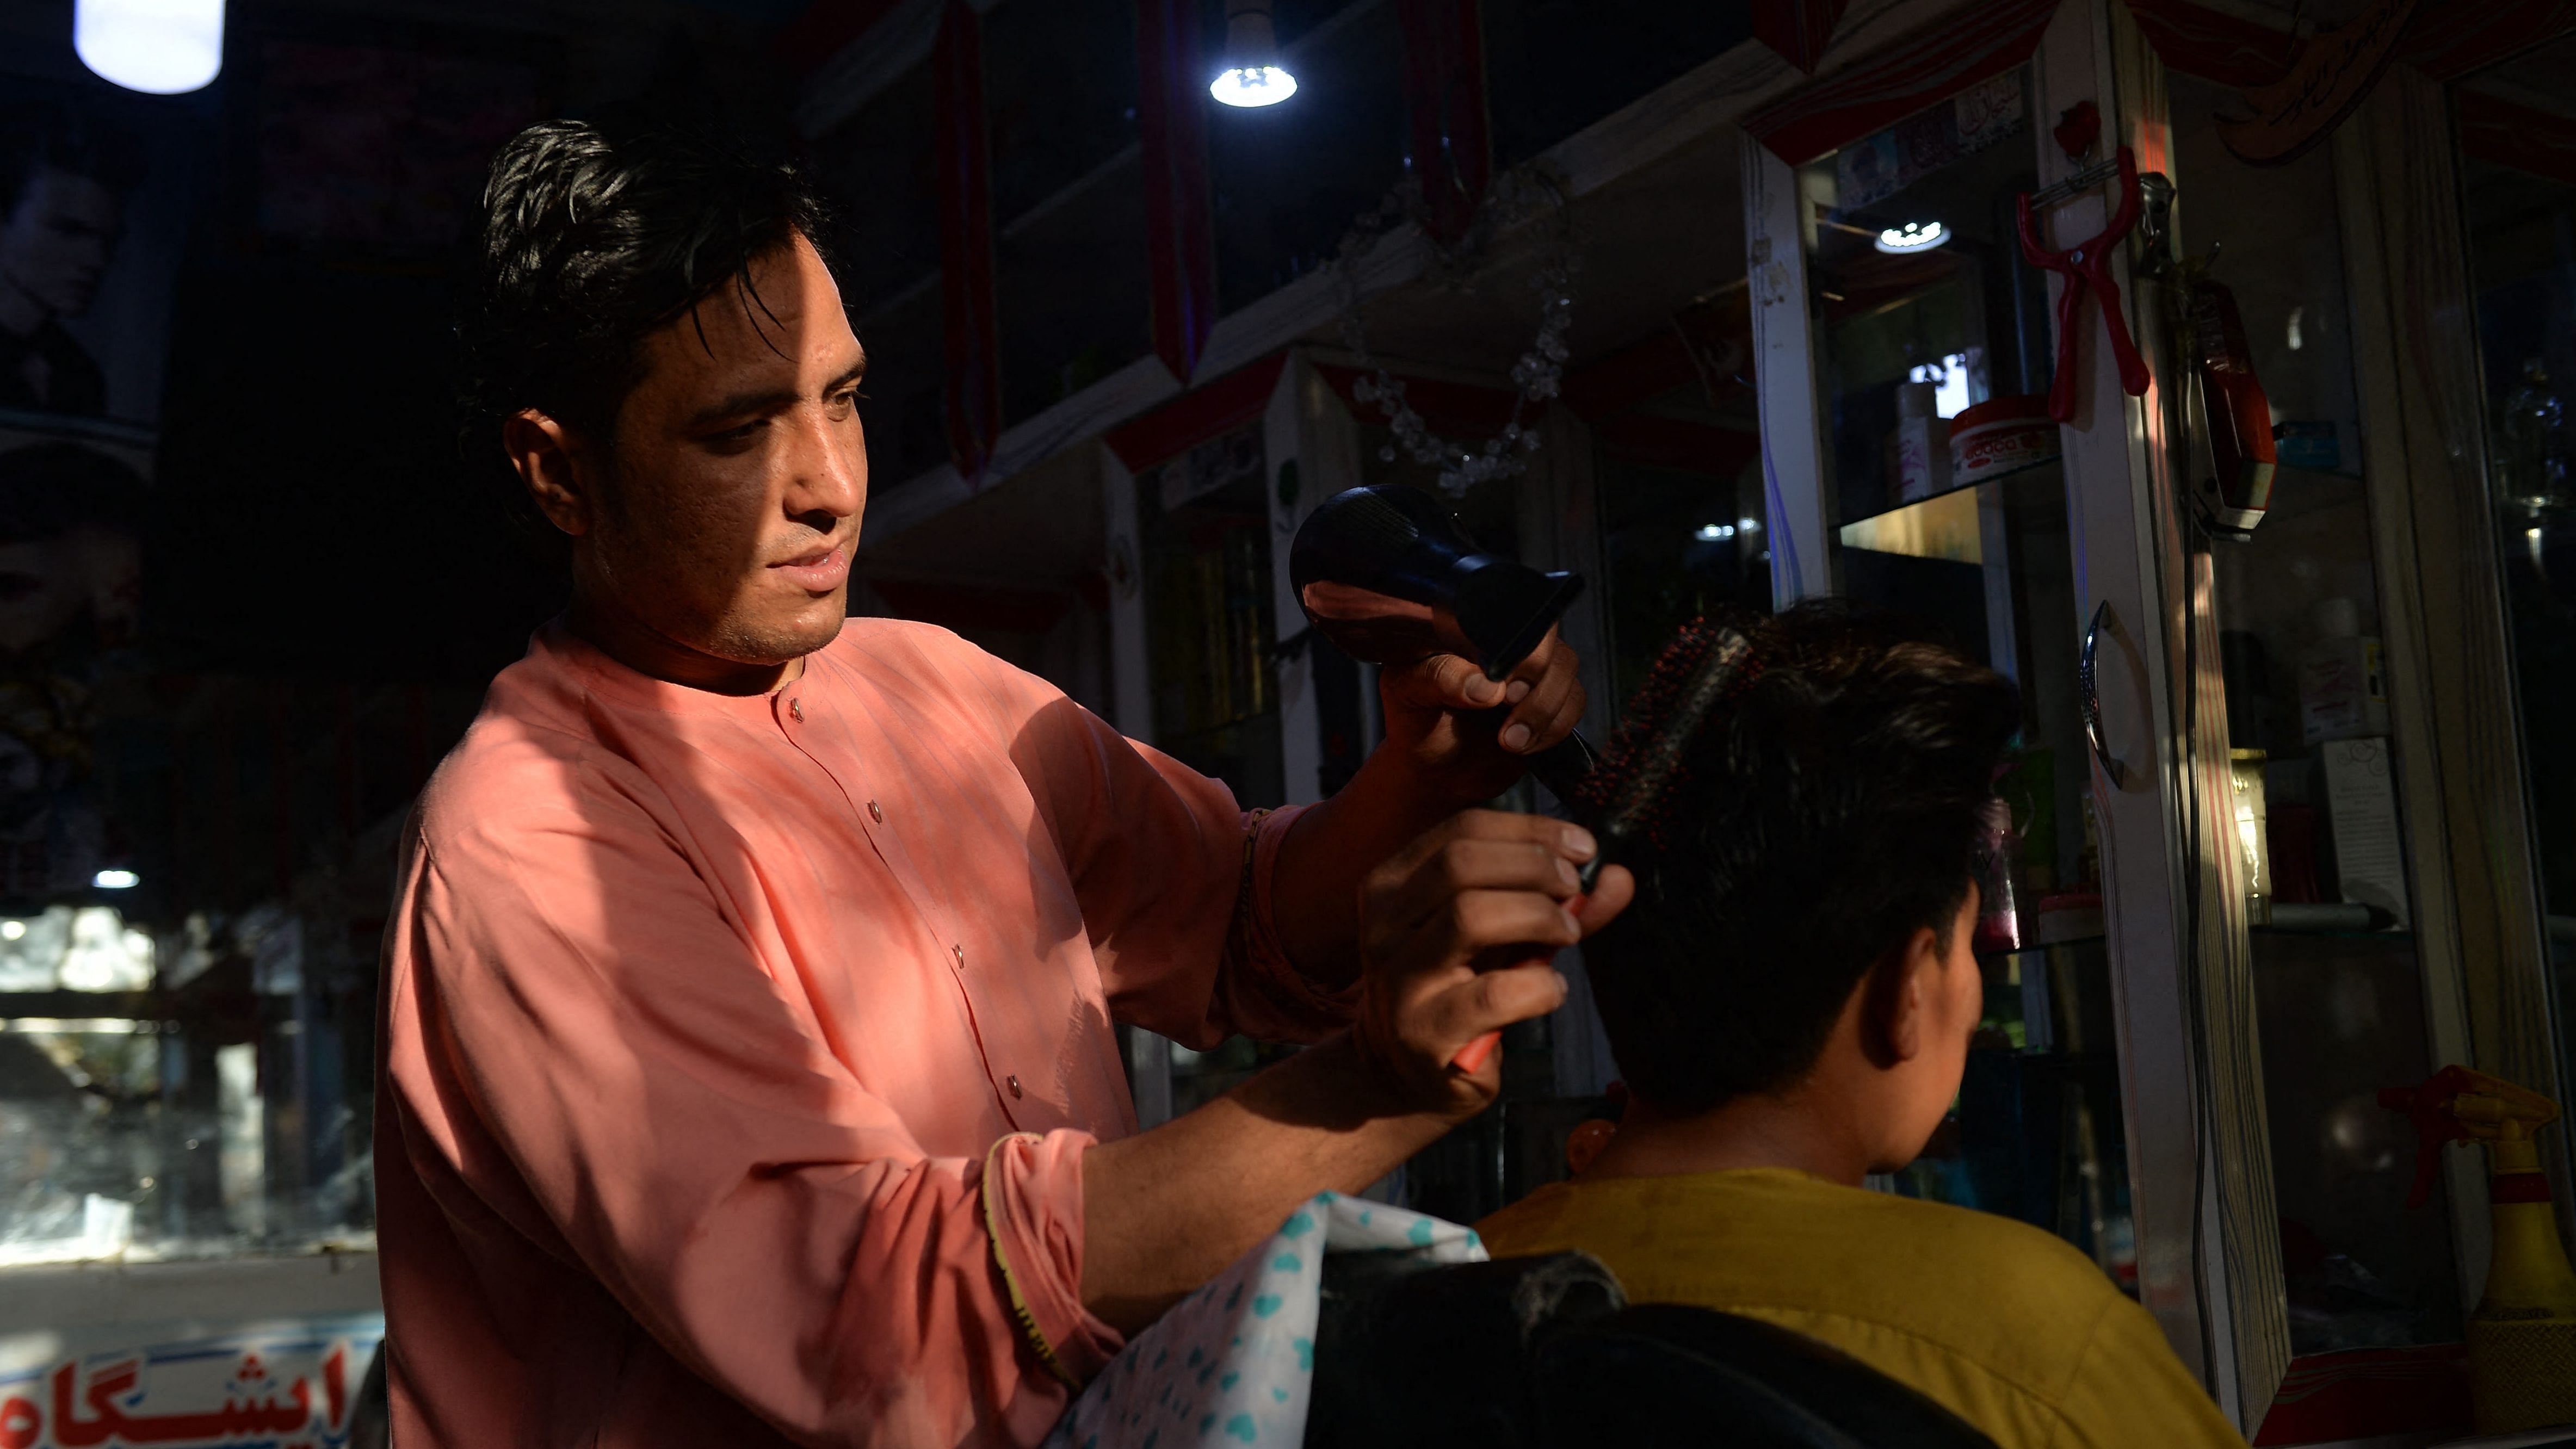 24-year-old Nader Shah (L) attends a customer at his barbershop in Herat. Credit: AFP Photo